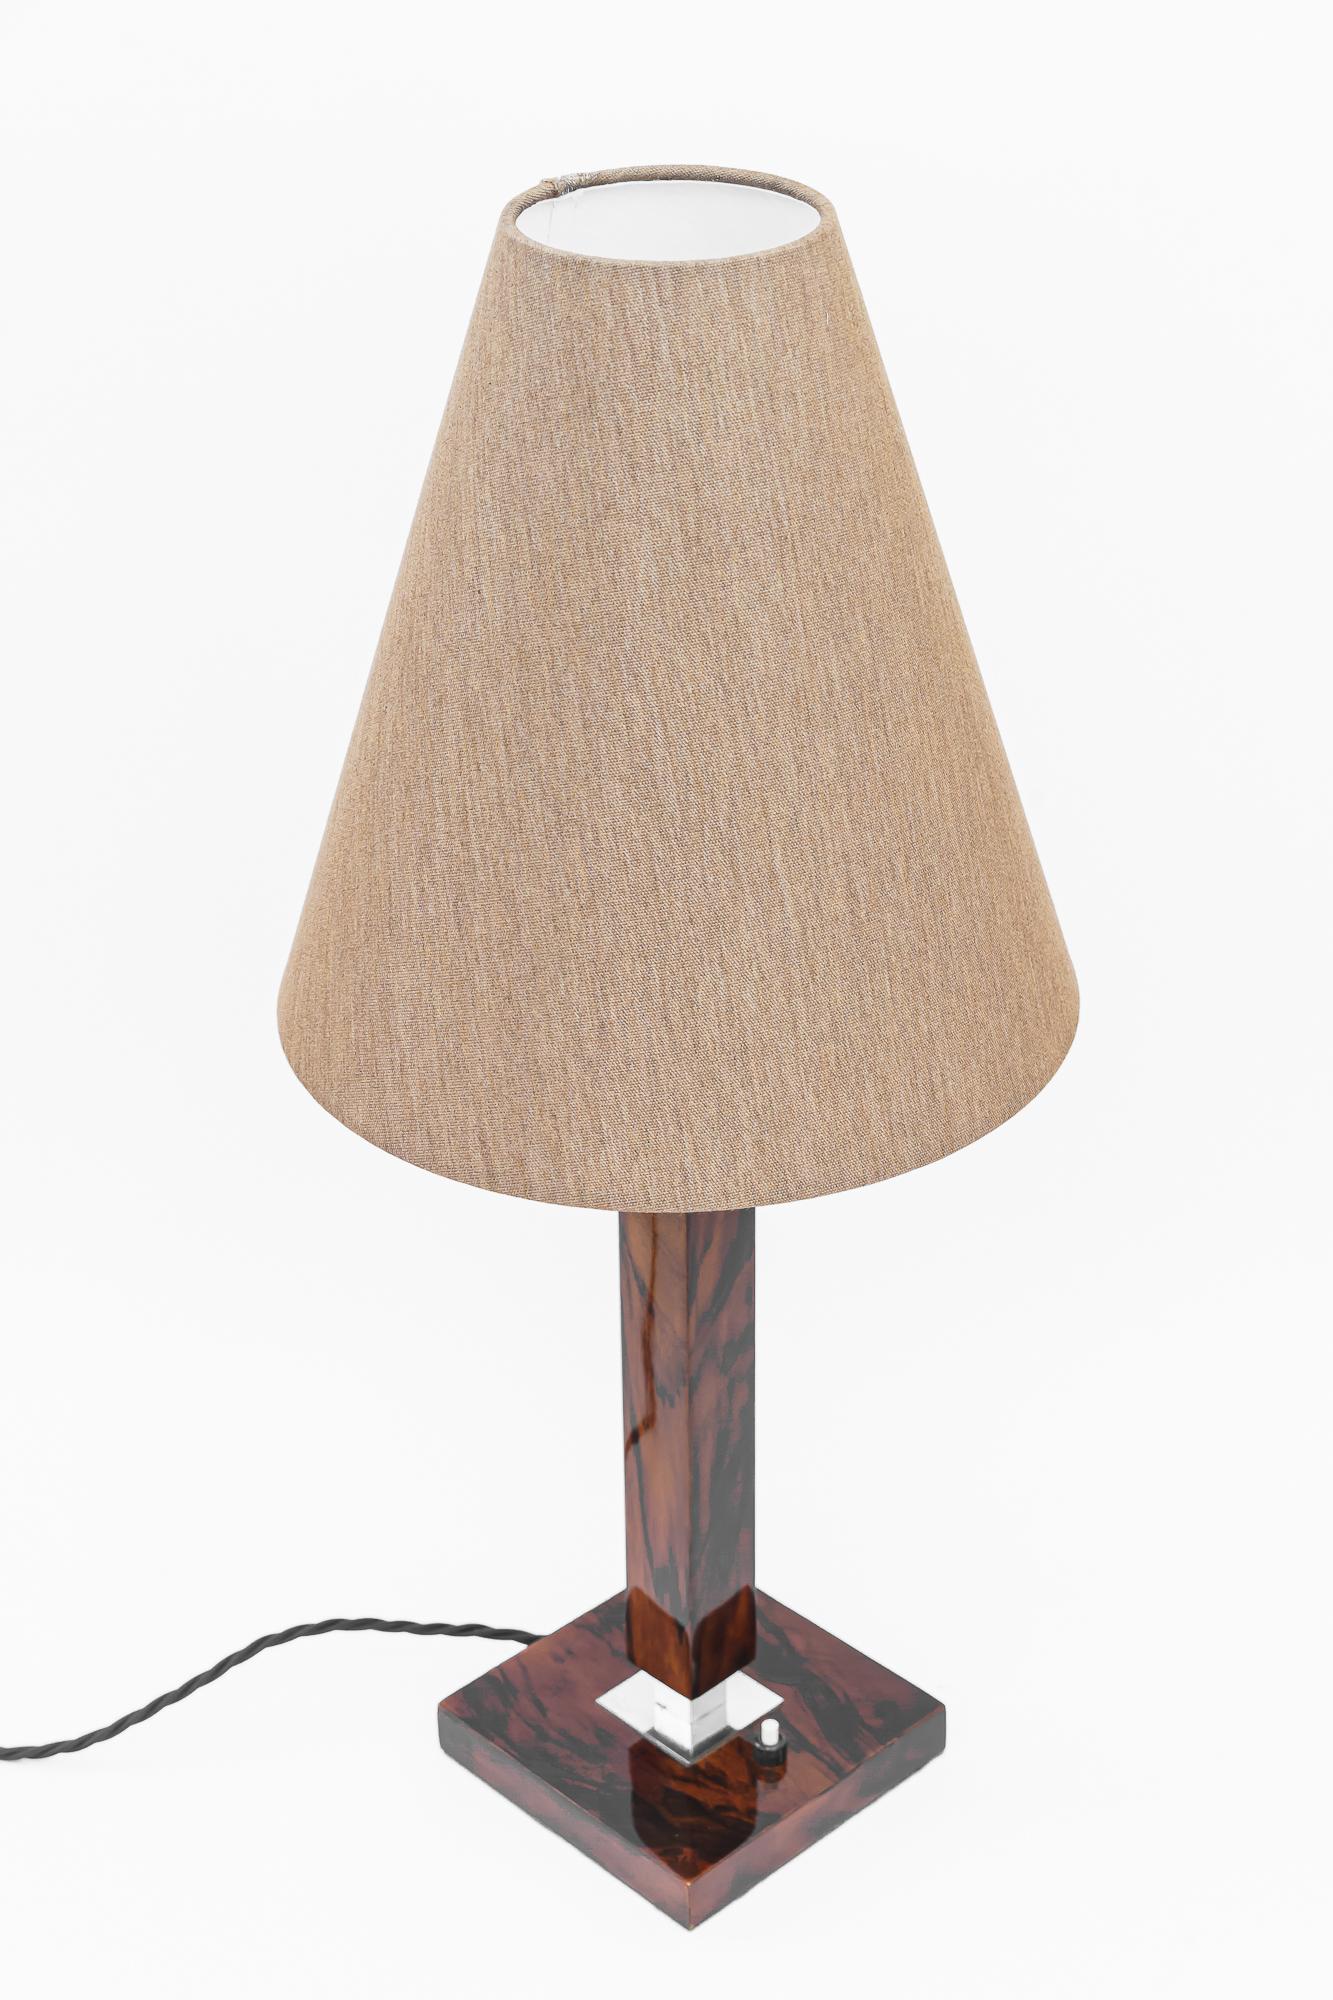 Art Deco Table Lamp Vienna Around 1920 Nut Wood and Fabric Shade In Good Condition For Sale In Wien, AT